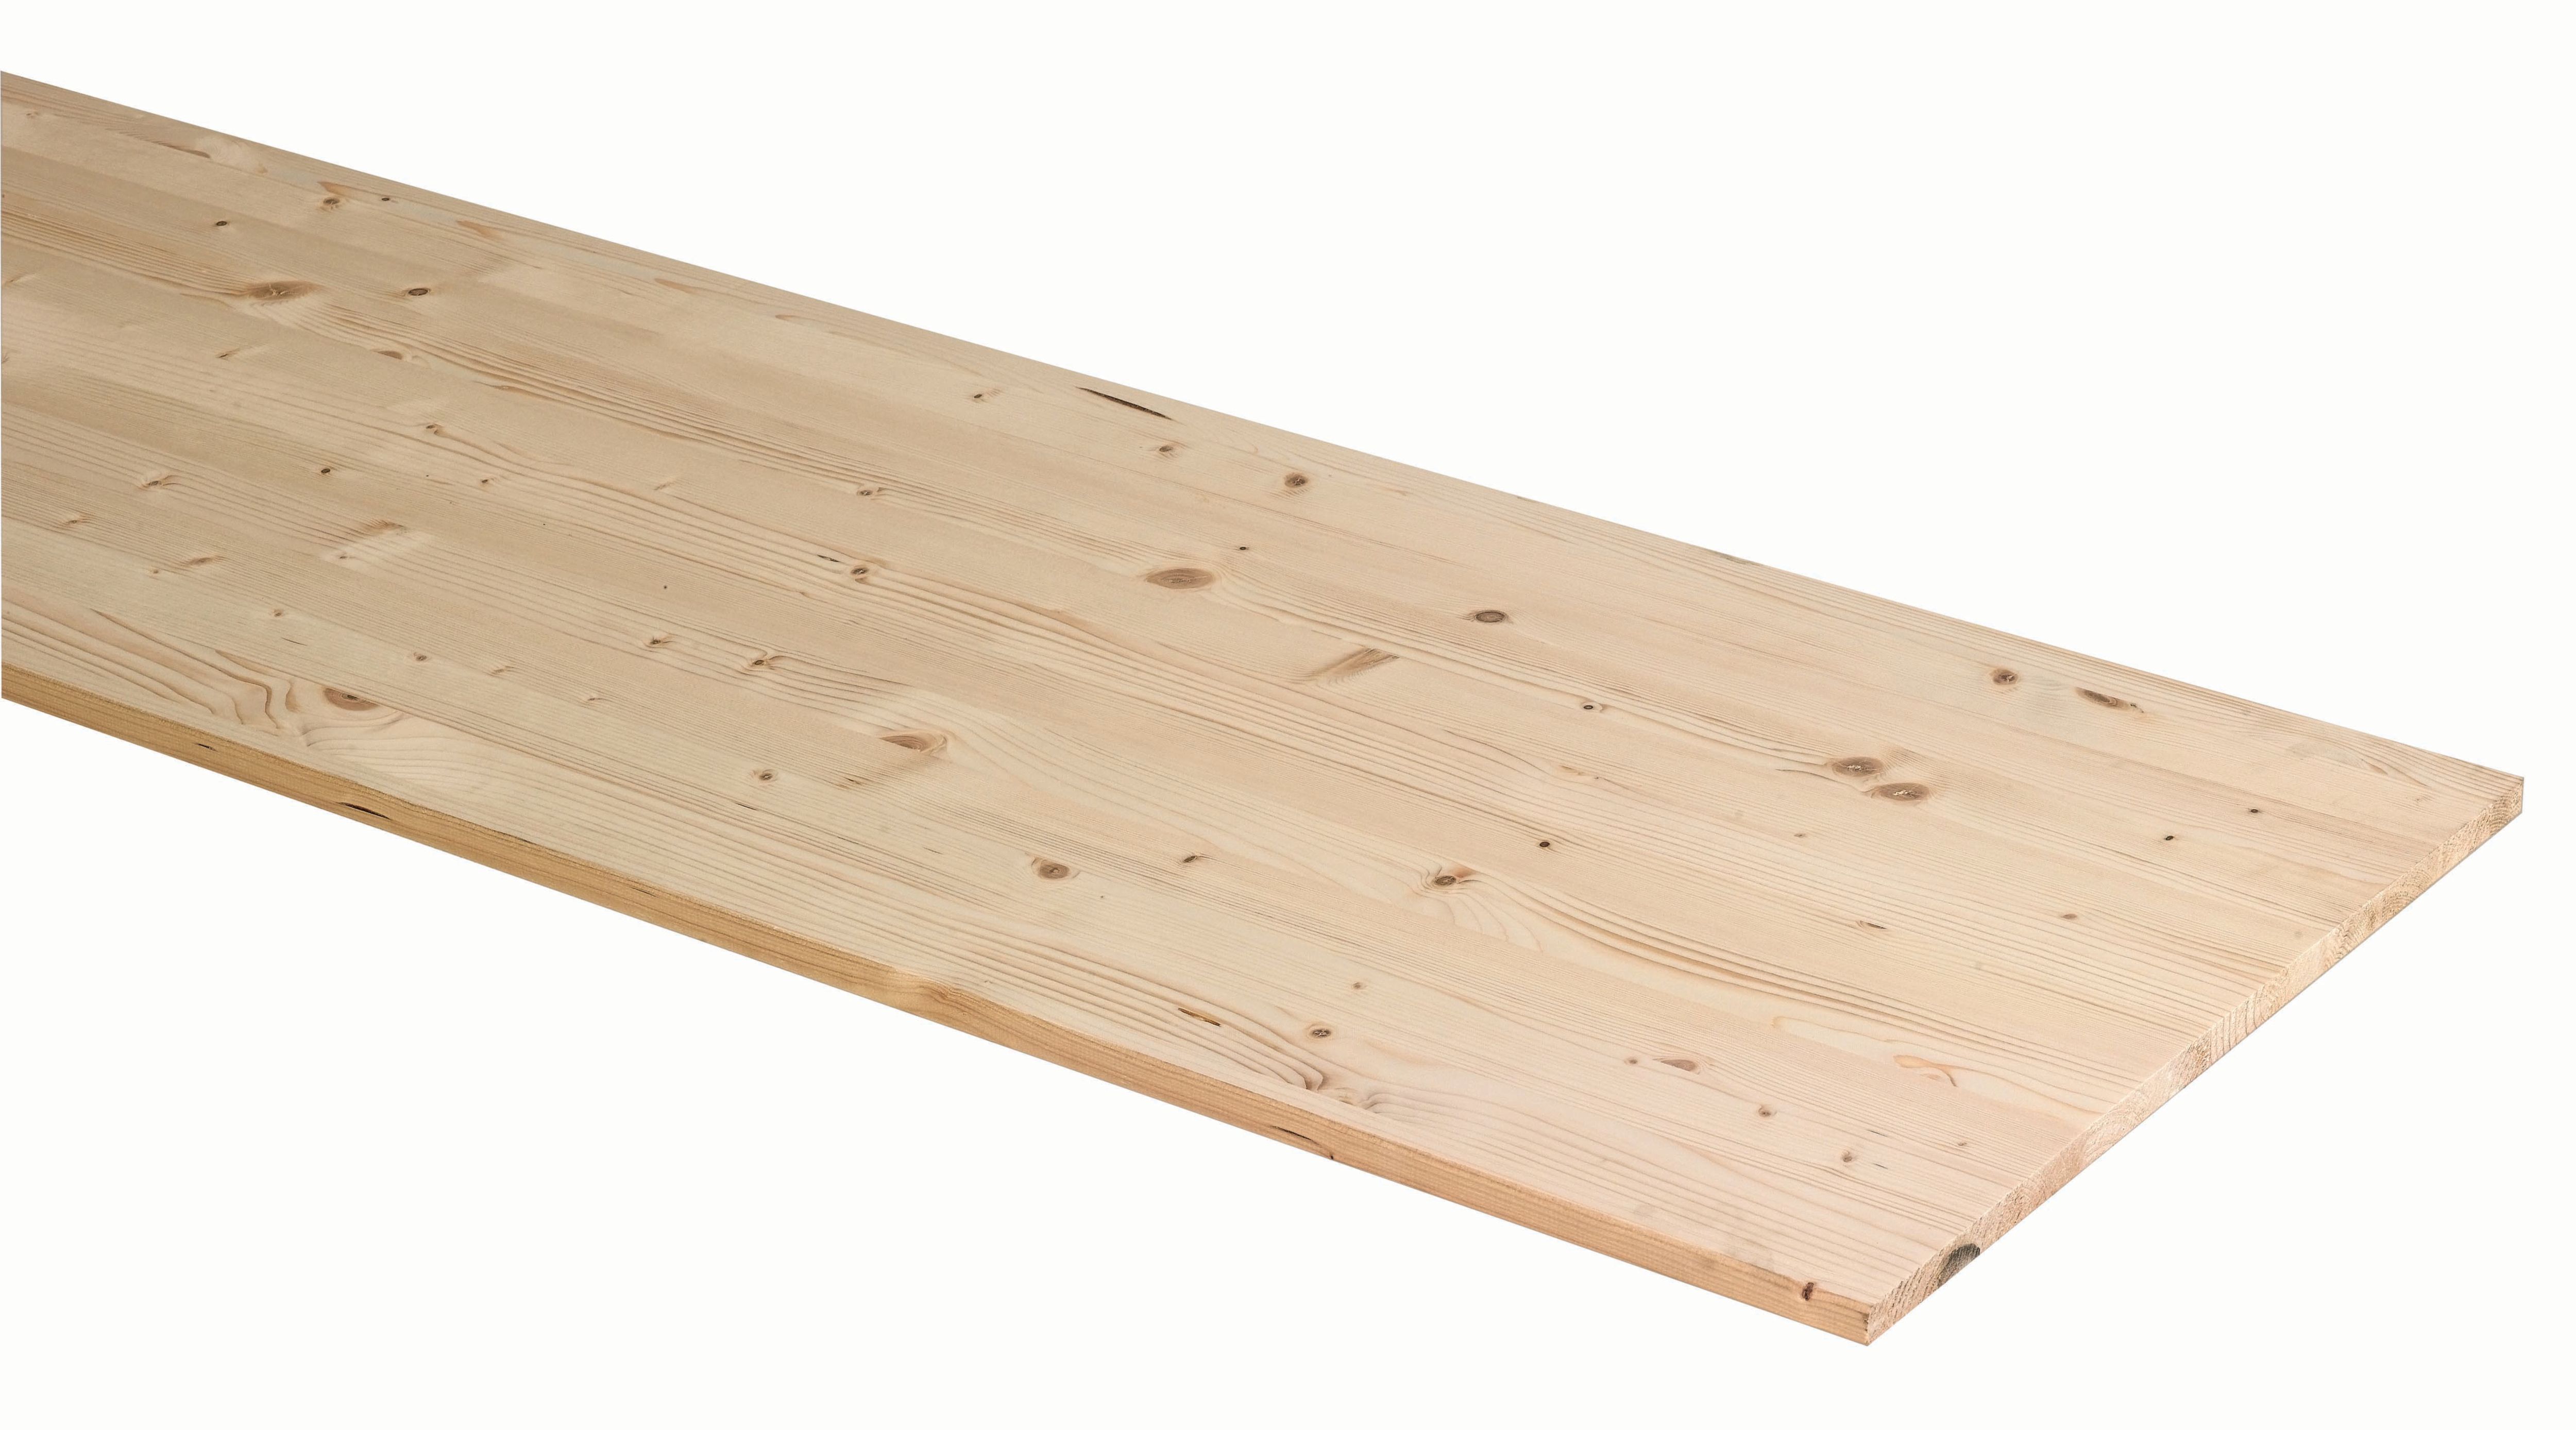 Image of Wickes General Purpose Spruce Timberboard - 18mm x 300mm x 1150mm